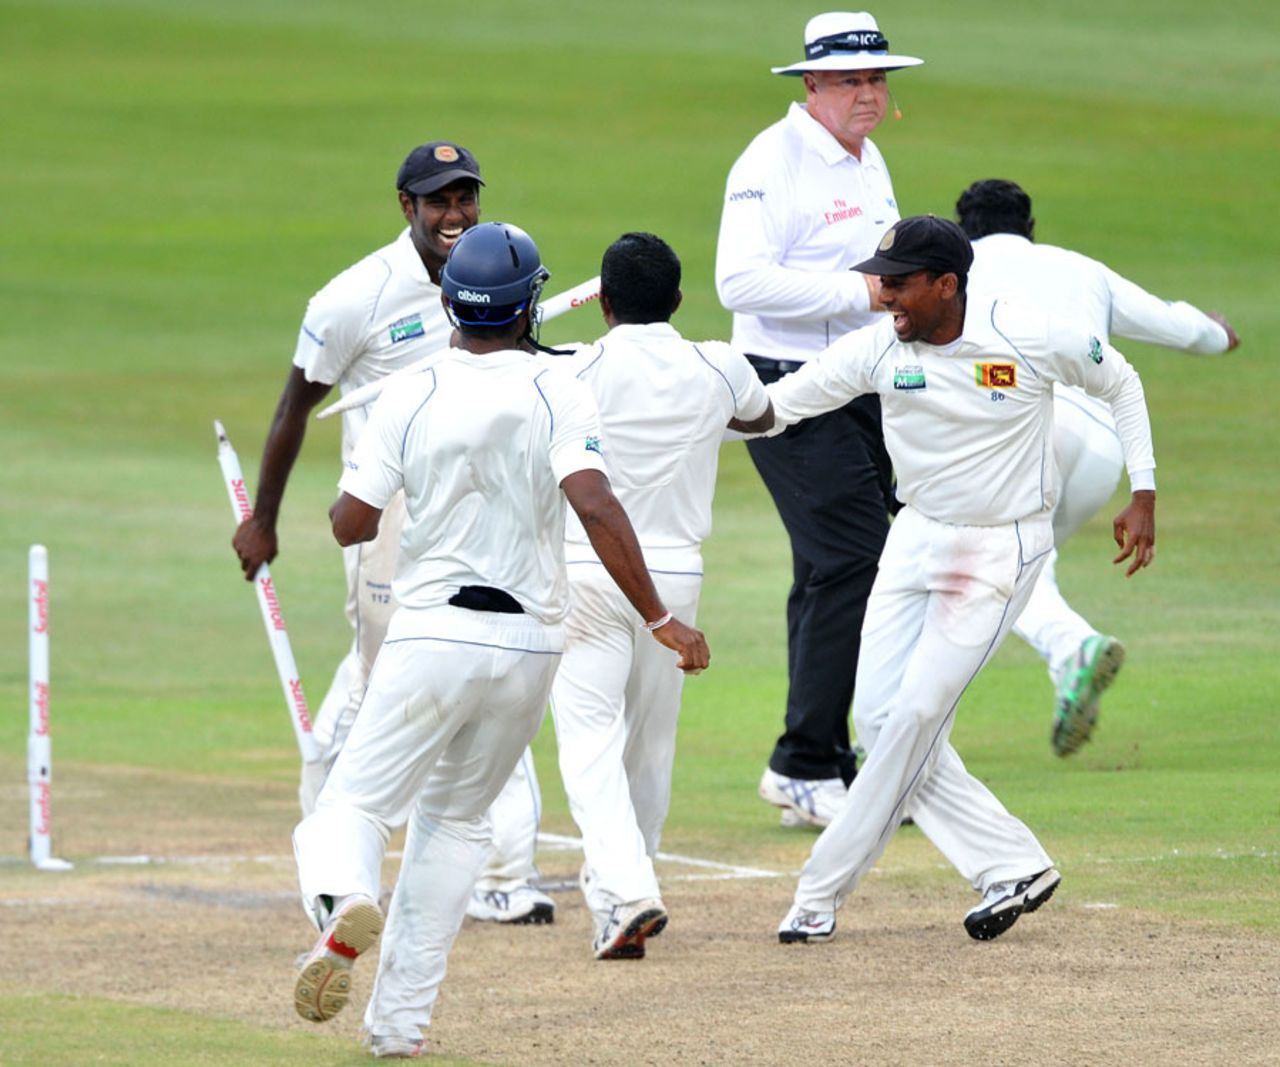 Sri Lanka's players celebrate their maiden Test win in South Africa, South Africa v Sri Lanka, 2nd Test, Durban, 4th day, December 29, 2011